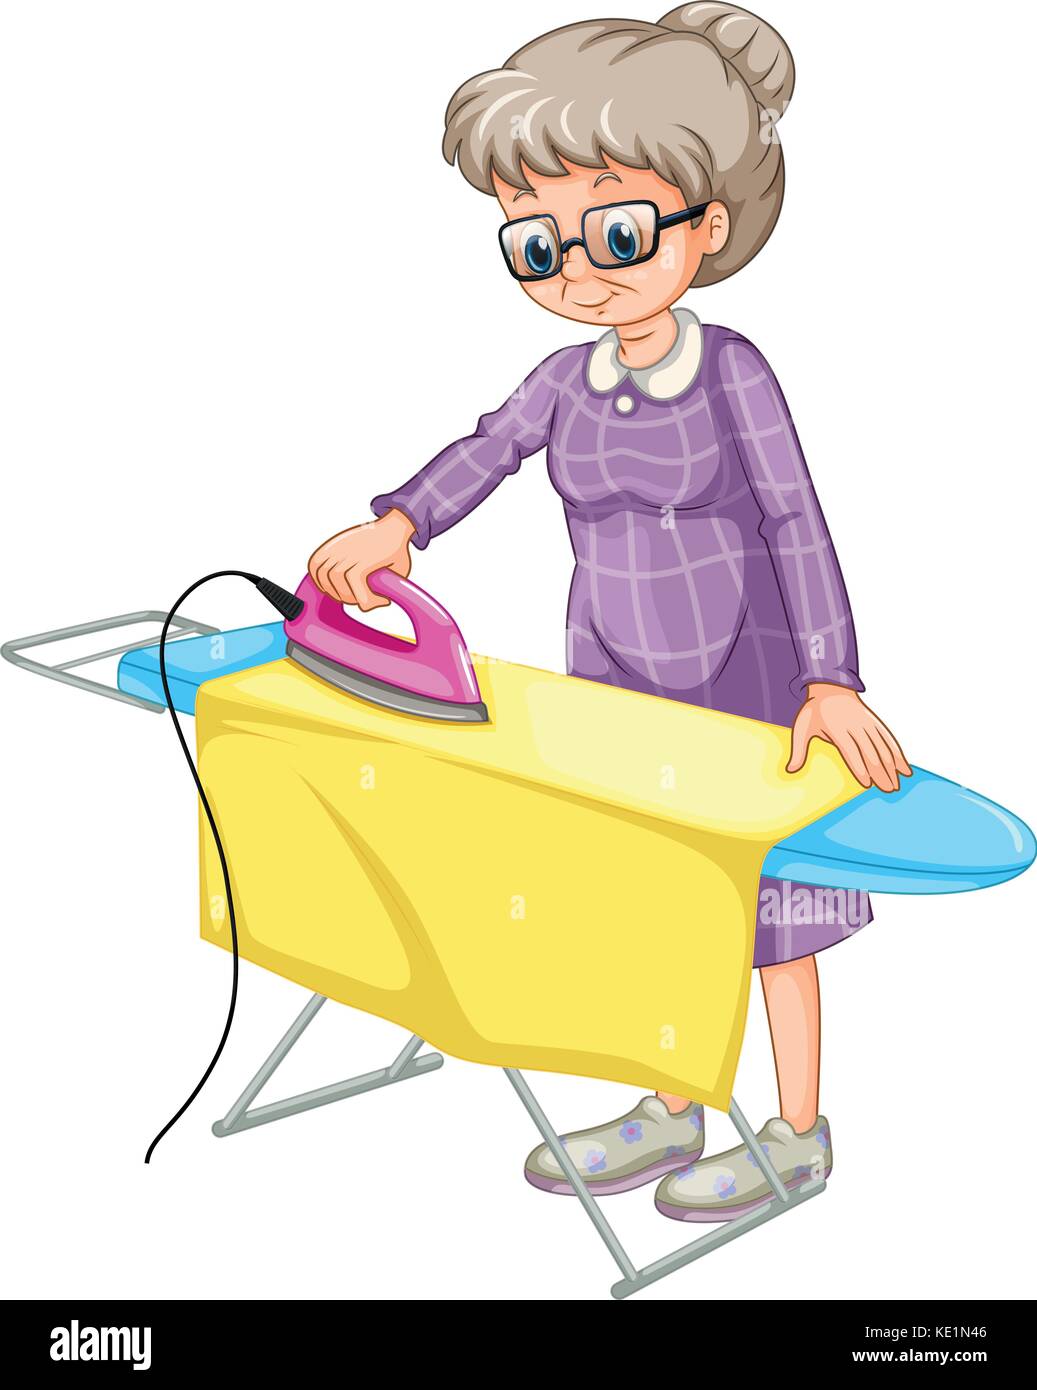 Old woman ironing clothes on ironing board Stock Vector